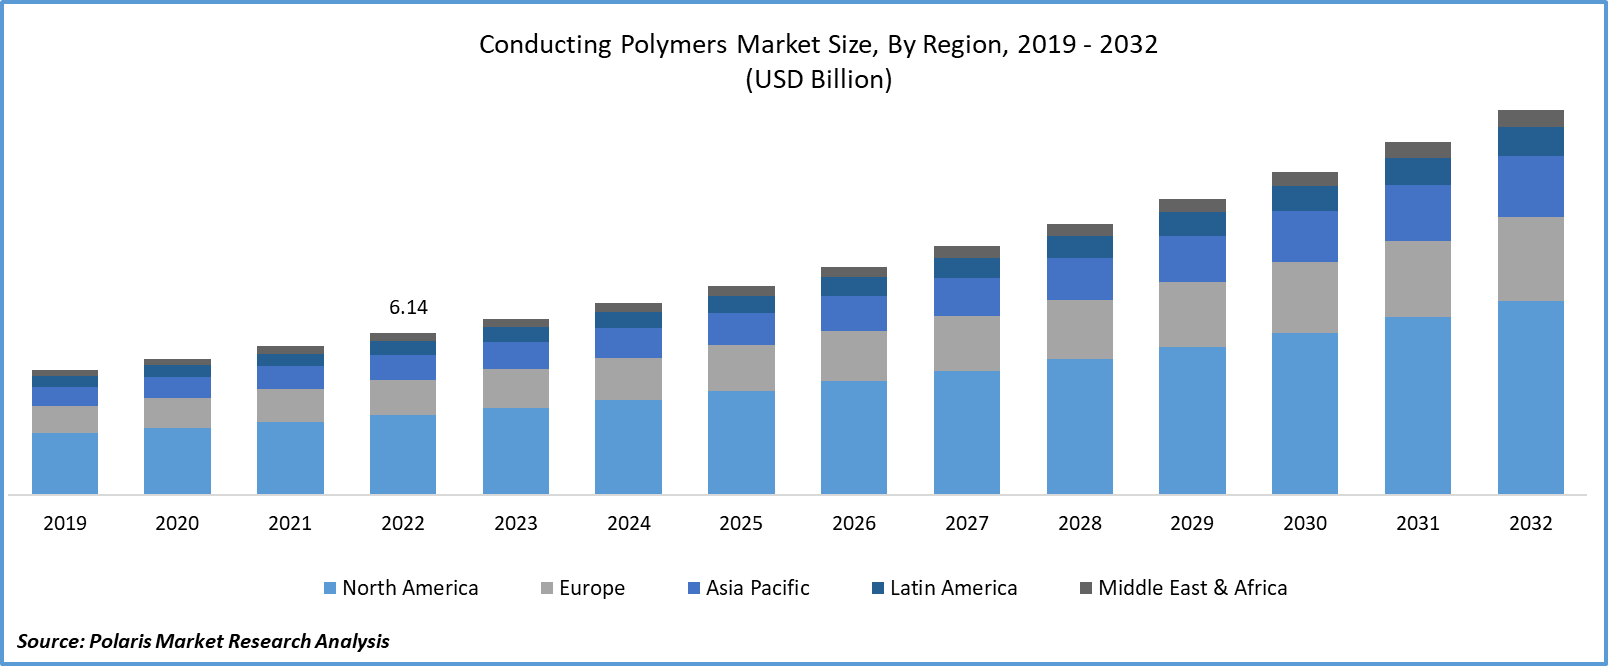 Conducting Polymers Market Size